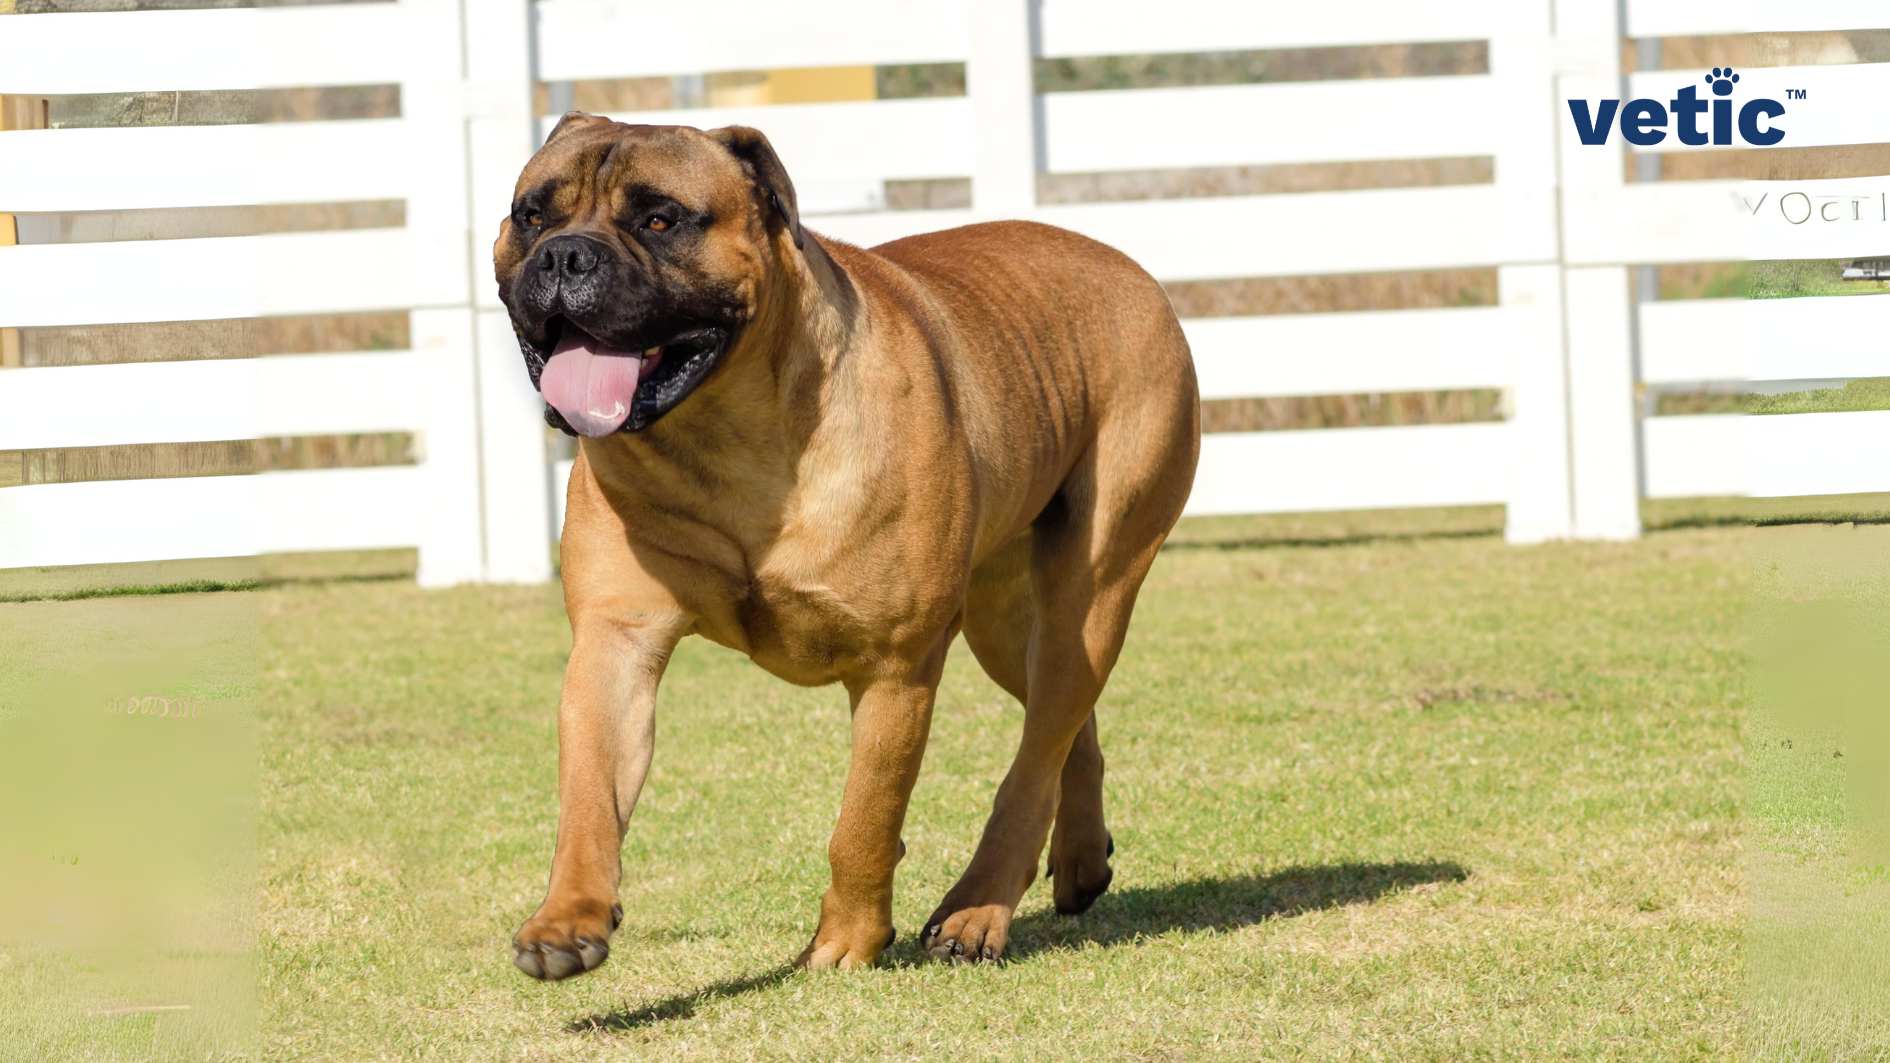 The image shows a brown-colored Bullmastiff dog standing on a green lawn, with a white fence and the logo of “vetic” in the background. The dog has a muscular and sturdy build, with dark ears and face. It is panting with its tongue out, looking relaxed and calm. Bullmastiffs in India can be low-maintenance, if given the adequate exercise and grooming regularly